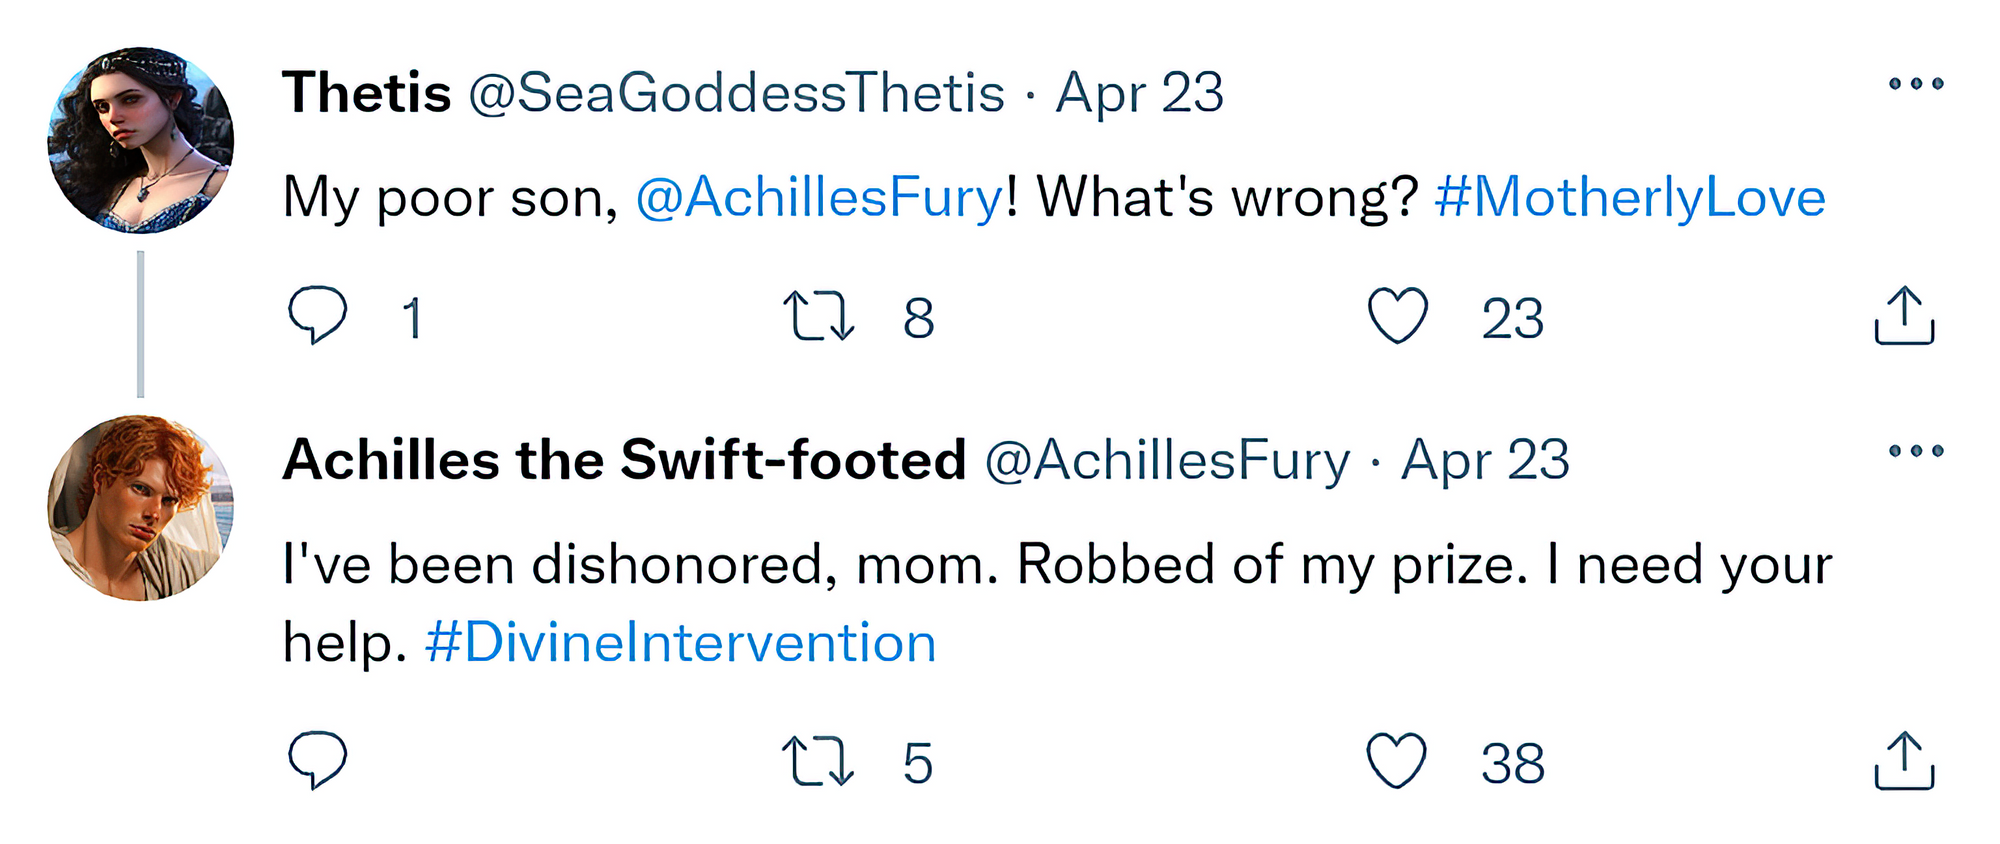 [Reply Chain]  @SeaGoddessThetis: "My poor son, @AchillesFury! What's wrong? #MotherlyLove"  @AchillesFury: "I've been dishonored, mom. Robbed of my prize. I need your help. #DivineIntervention"